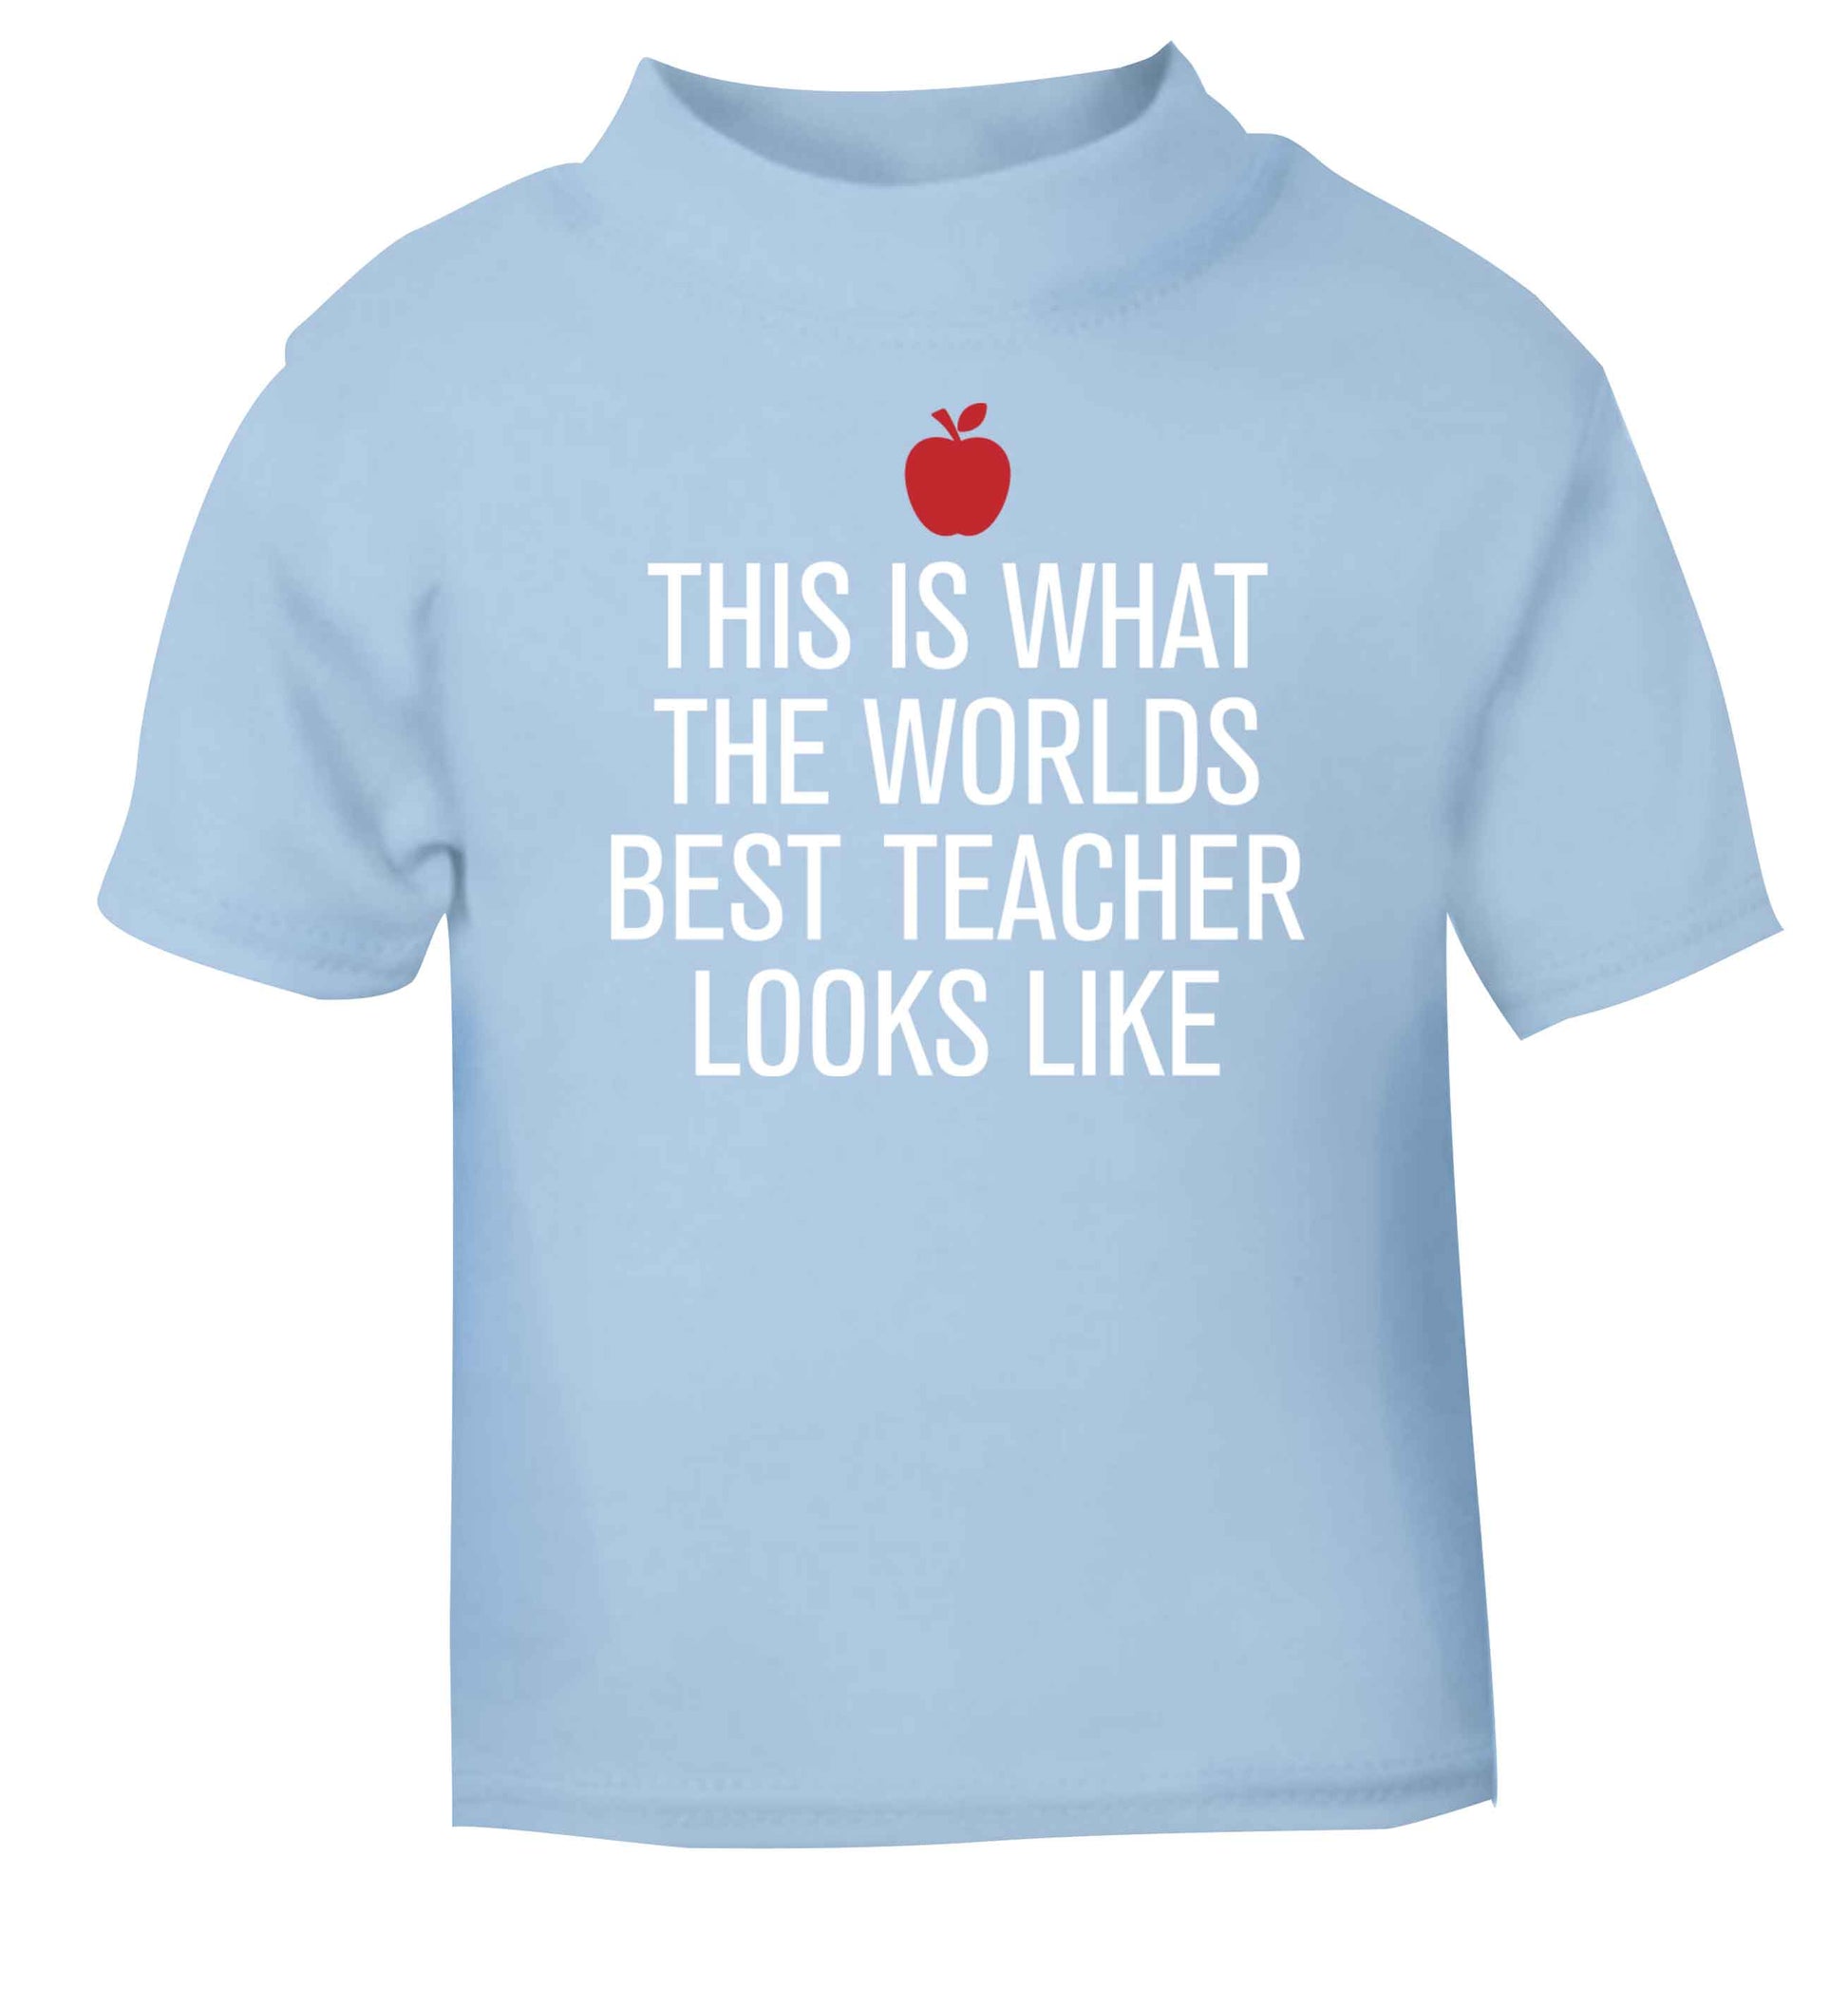 This is what the worlds best teacher looks like light blue baby toddler Tshirt 2 Years